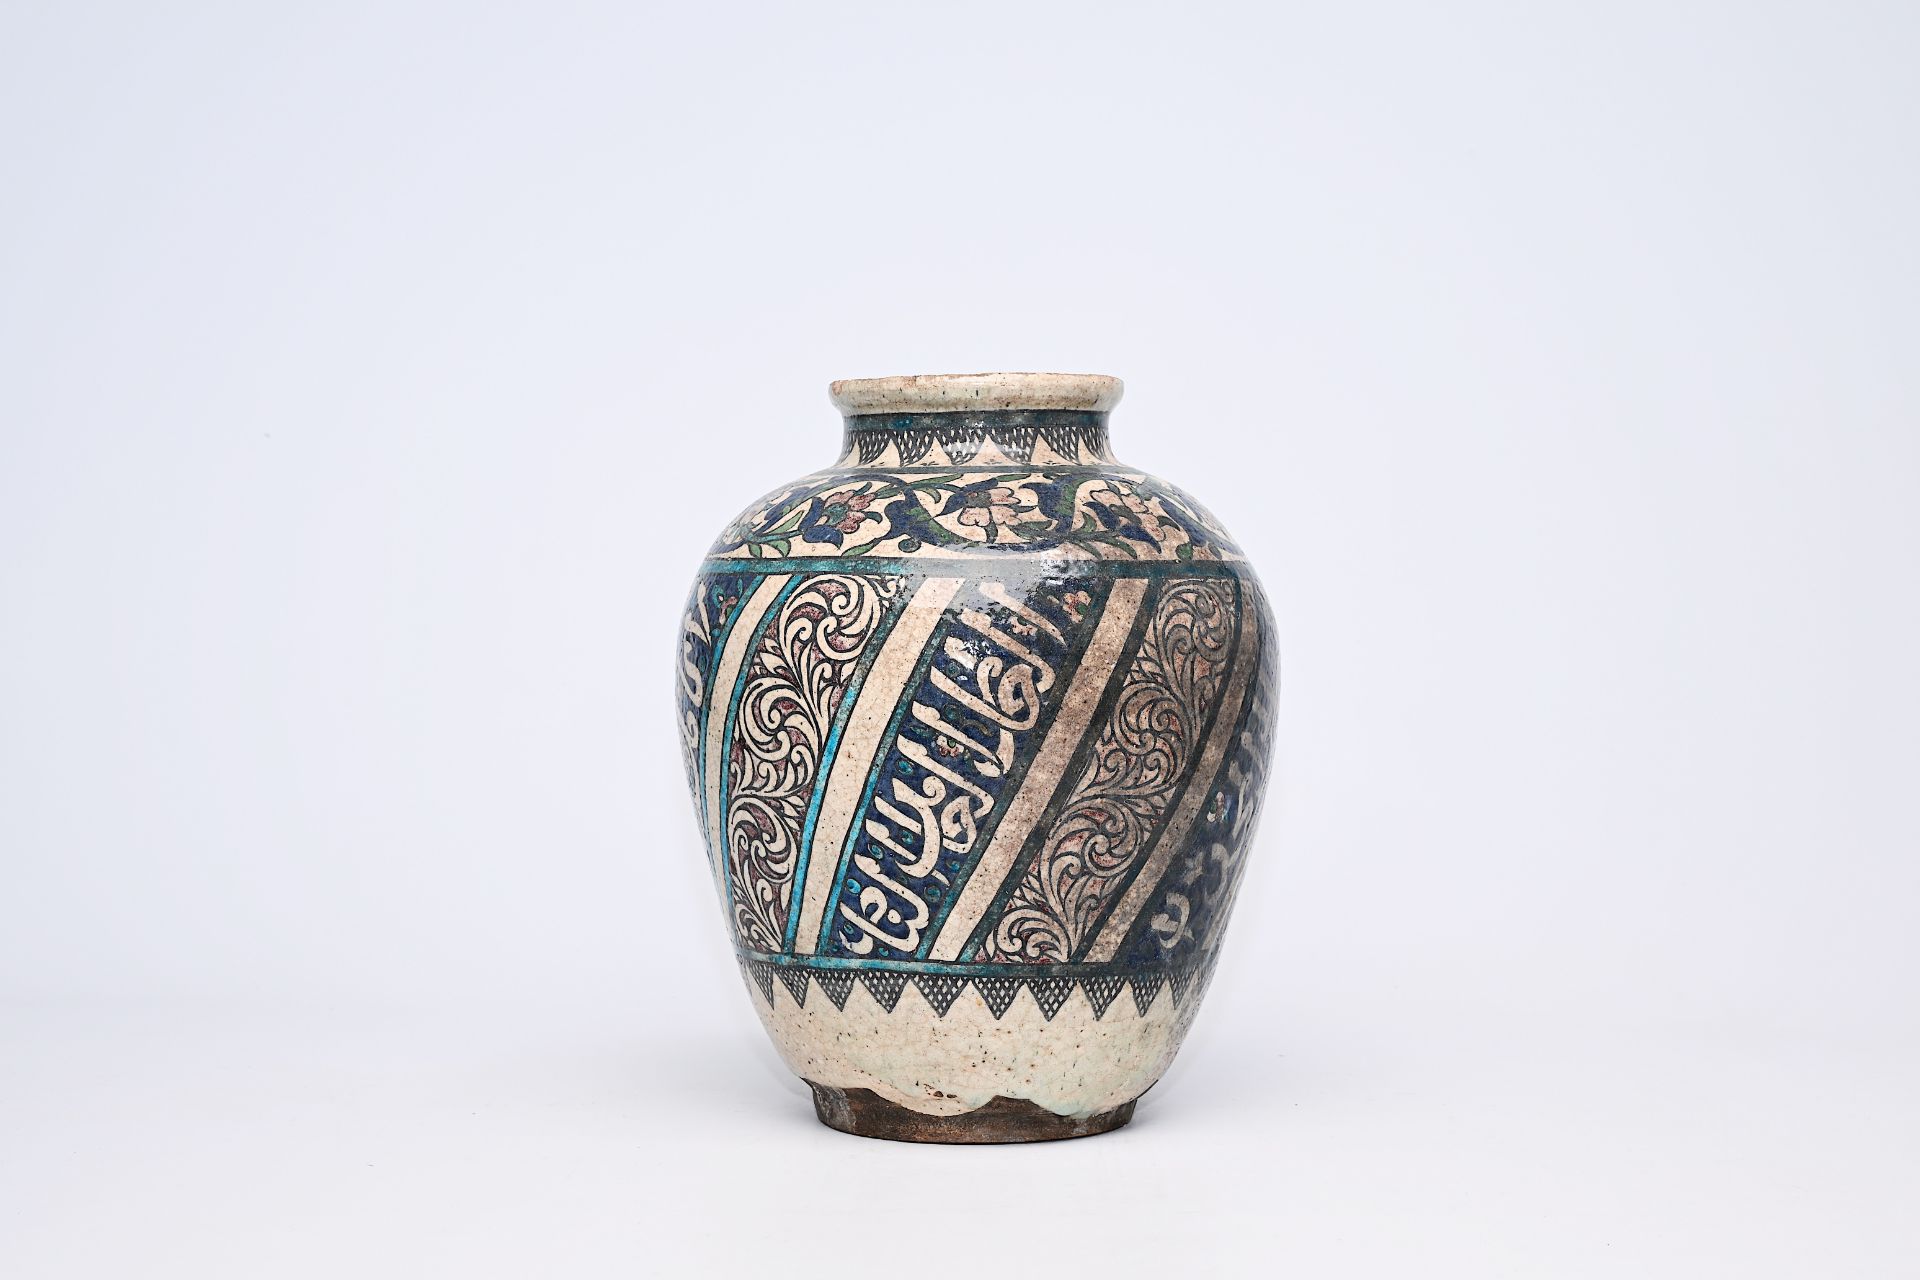 A polychrome pottery jar with floral and calligraphic design, Iran, 19th C. - Image 4 of 9